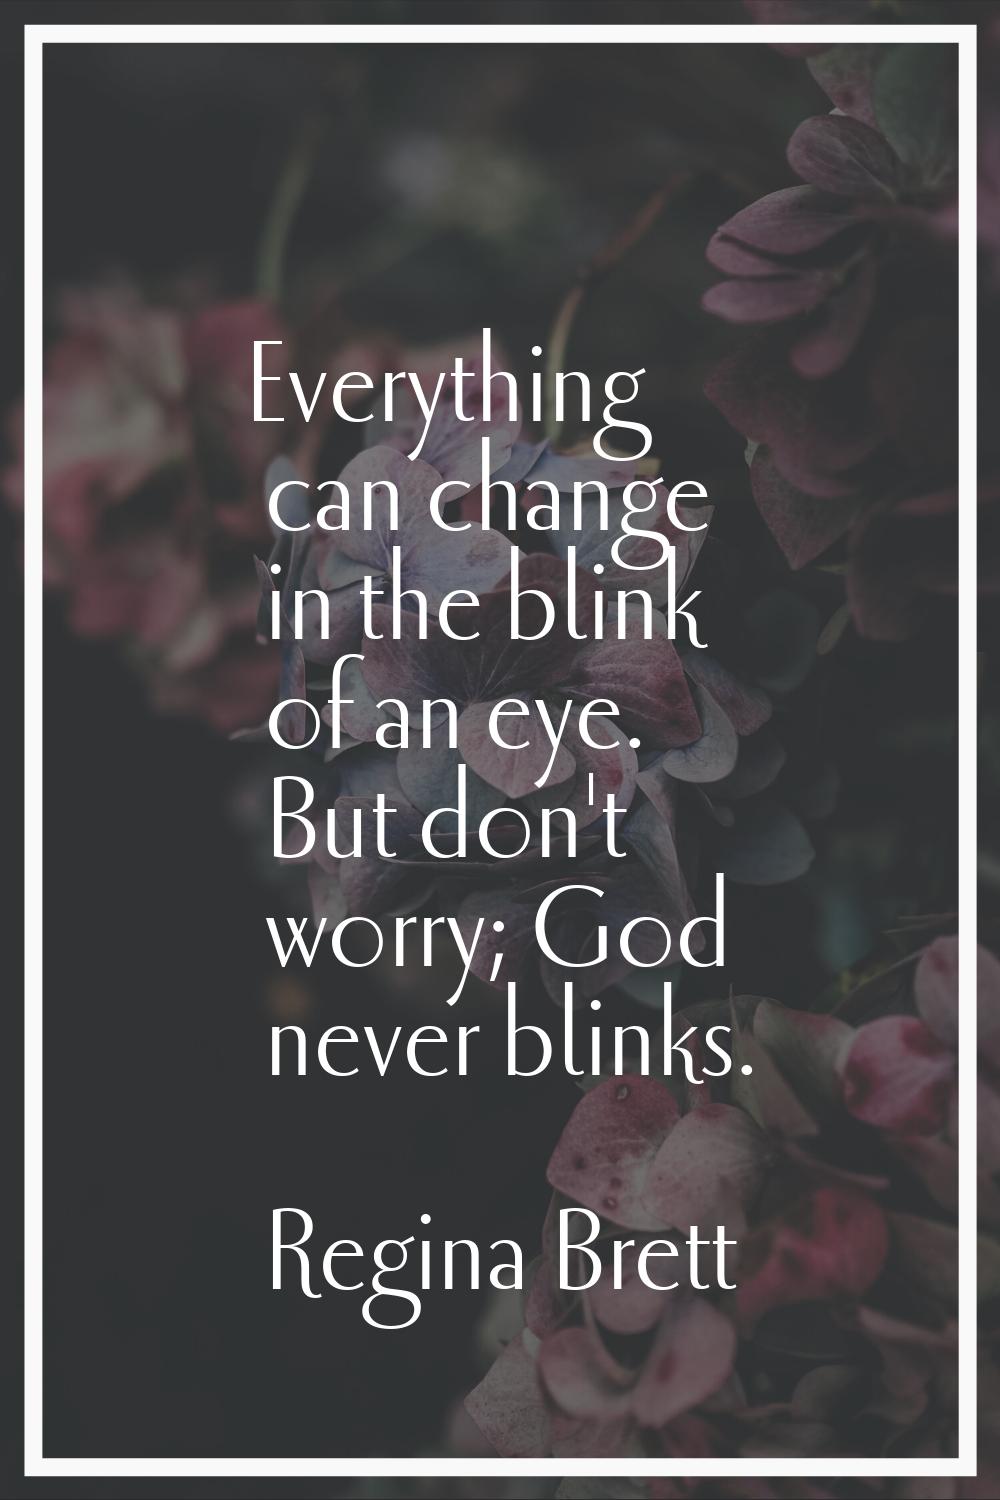 Everything can change in the blink of an eye. But don't worry; God never blinks.